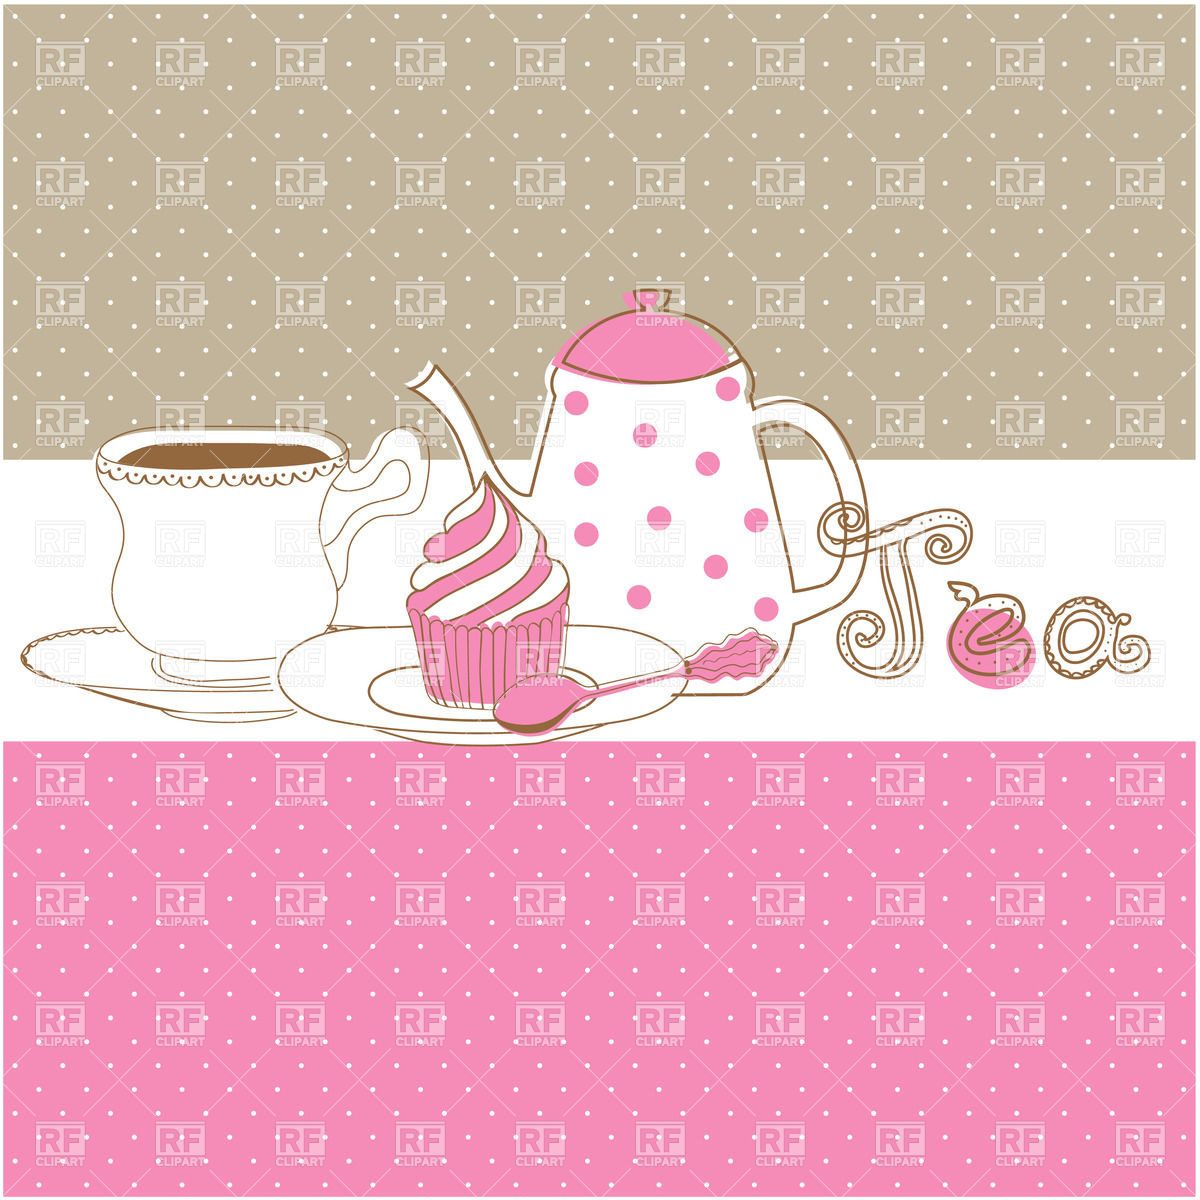 Tea Drinking   Cupcake Teapot And Cup 21858 Download Royalty Free    